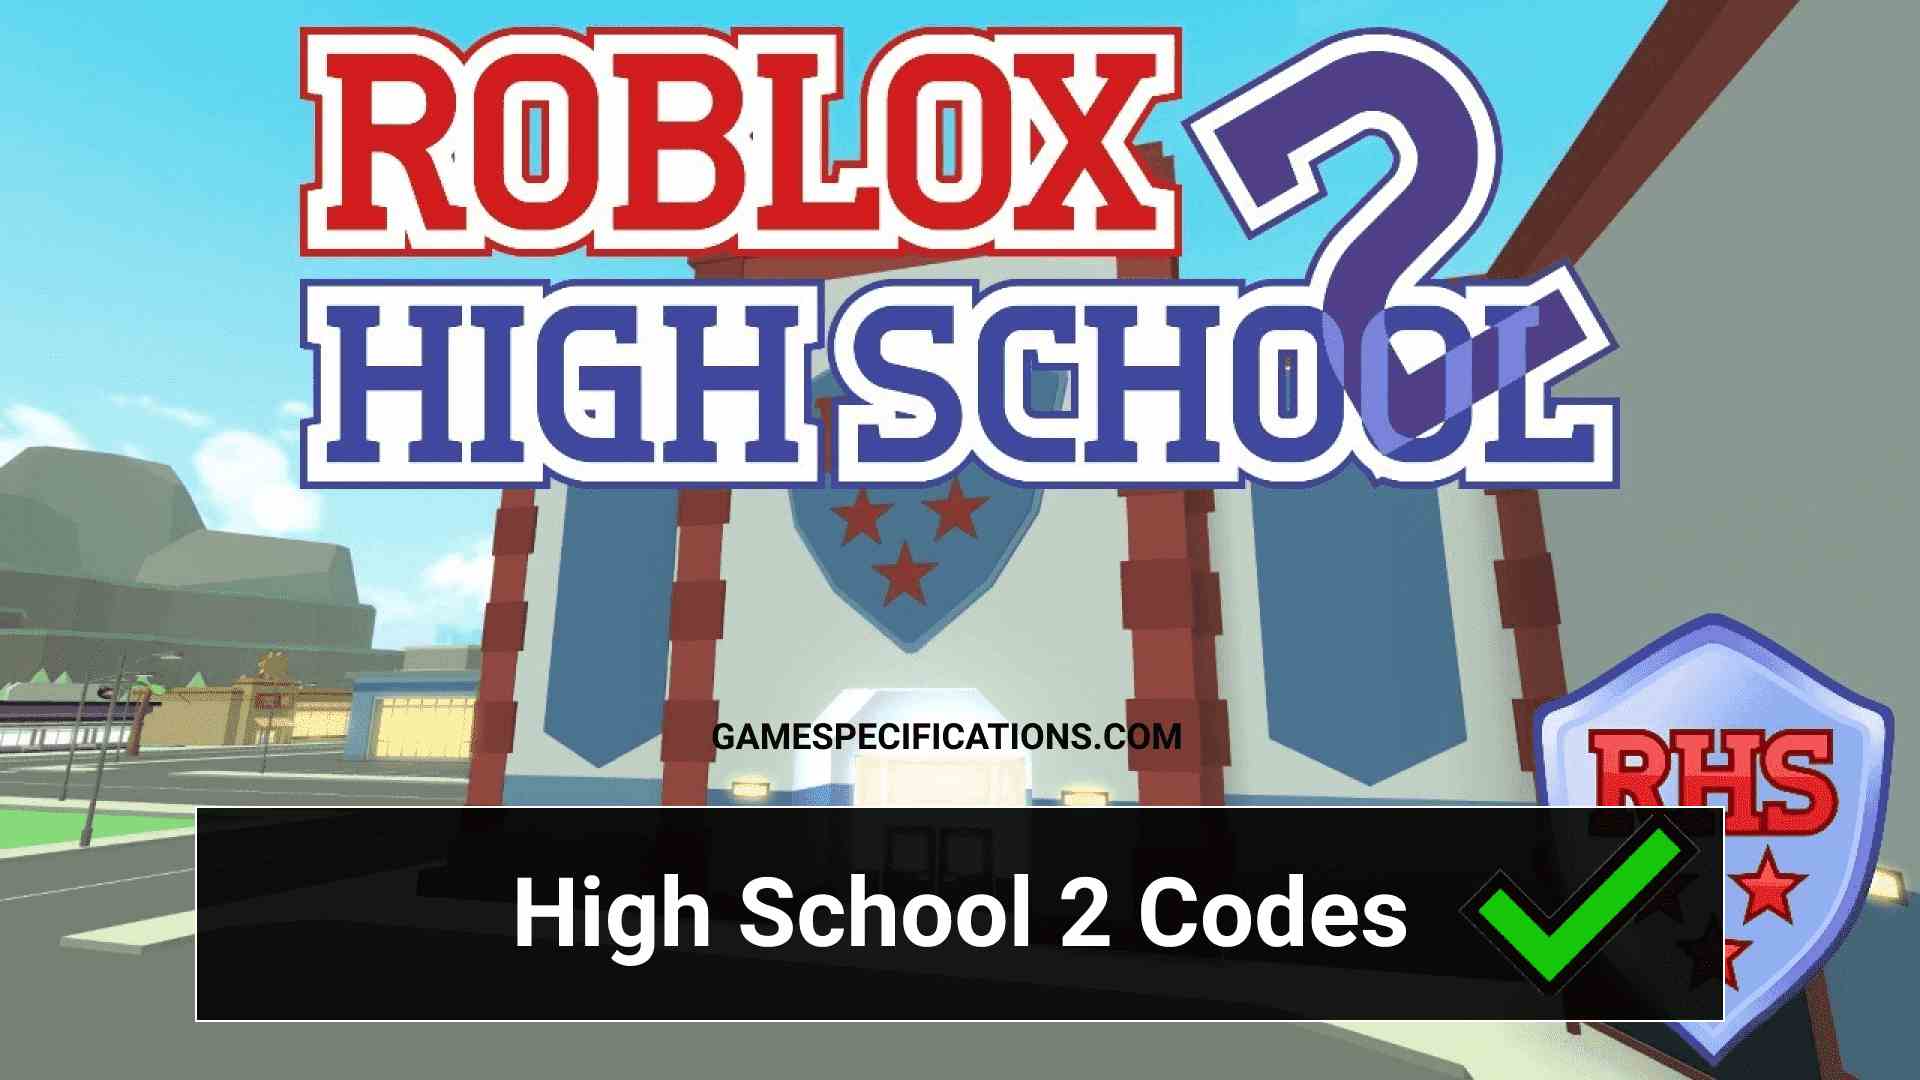 17 Working Roblox High School 2 Codes July 2021 Game Specifications - roblox high school codes